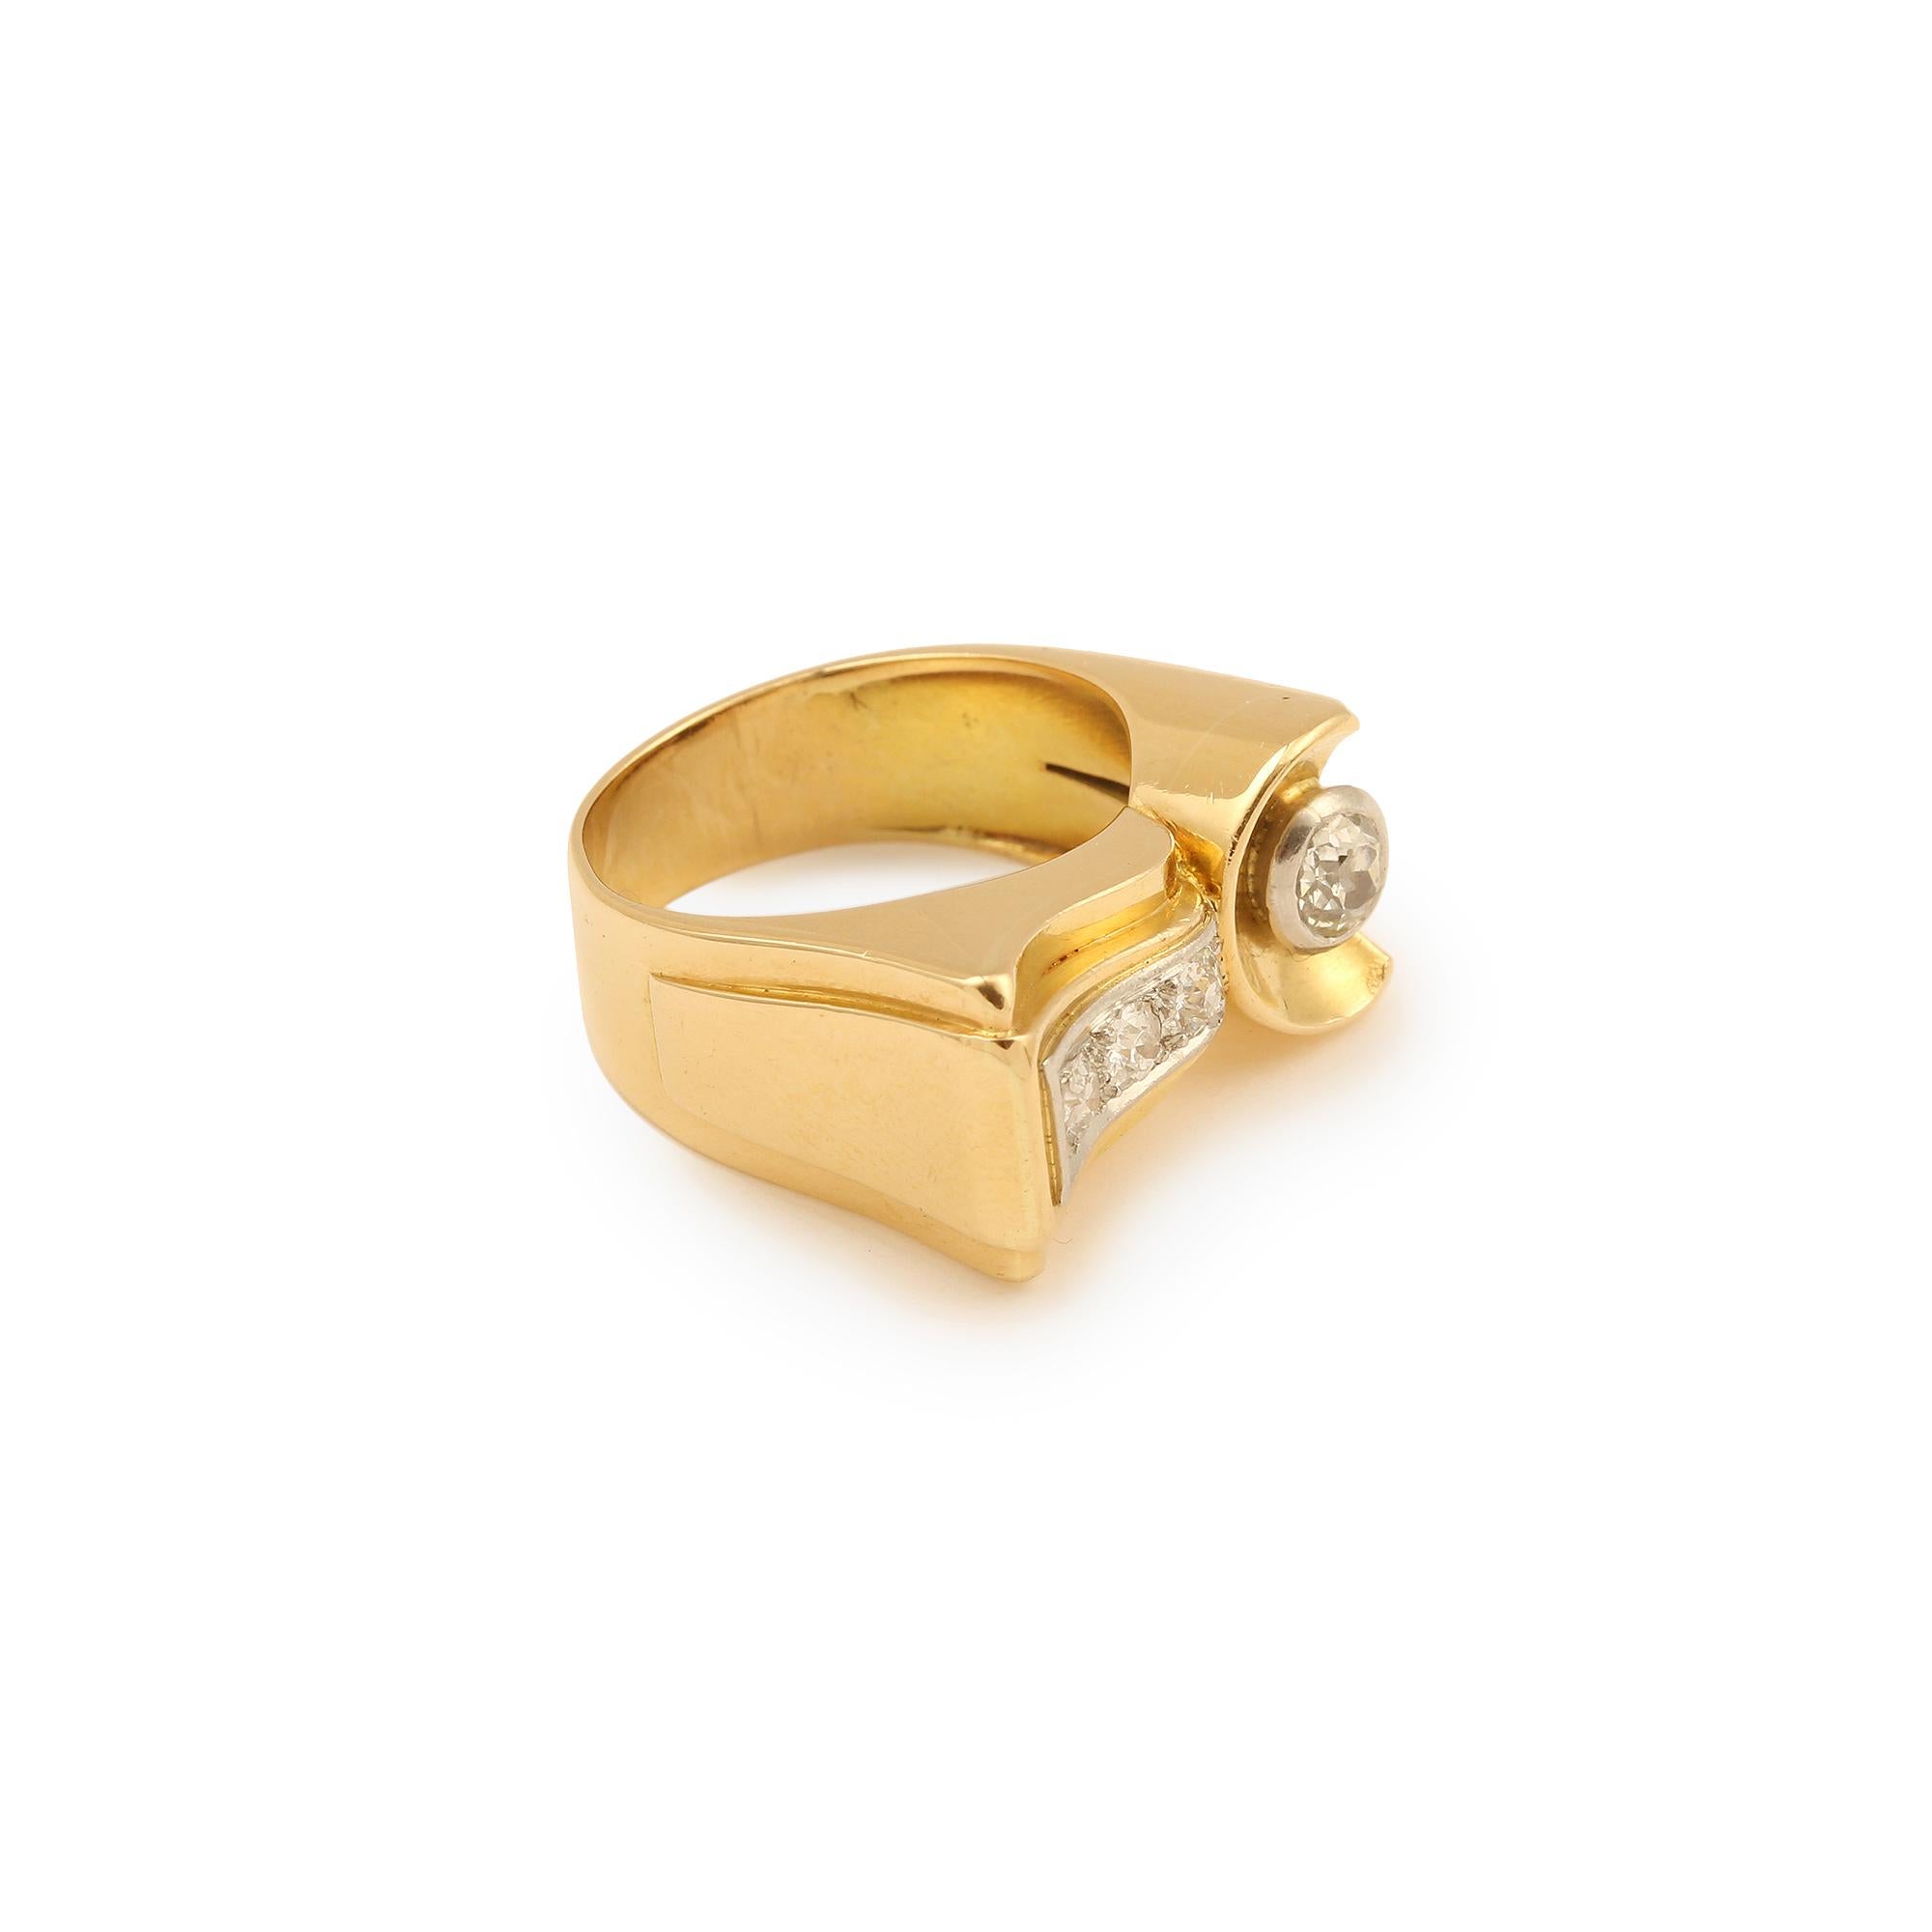 Yellow gold retro asymmetrical tank ring set with old cut diamonds.

Ring dimensions: 8.53 x 21 x 4.71 mm (0.336 x 0.826 x 0.185 inches)

Total approximate diamond weight: 0.45 carats

Ring weight: 10.40 g

Finger size: 54 (US size: 7)

18 carats